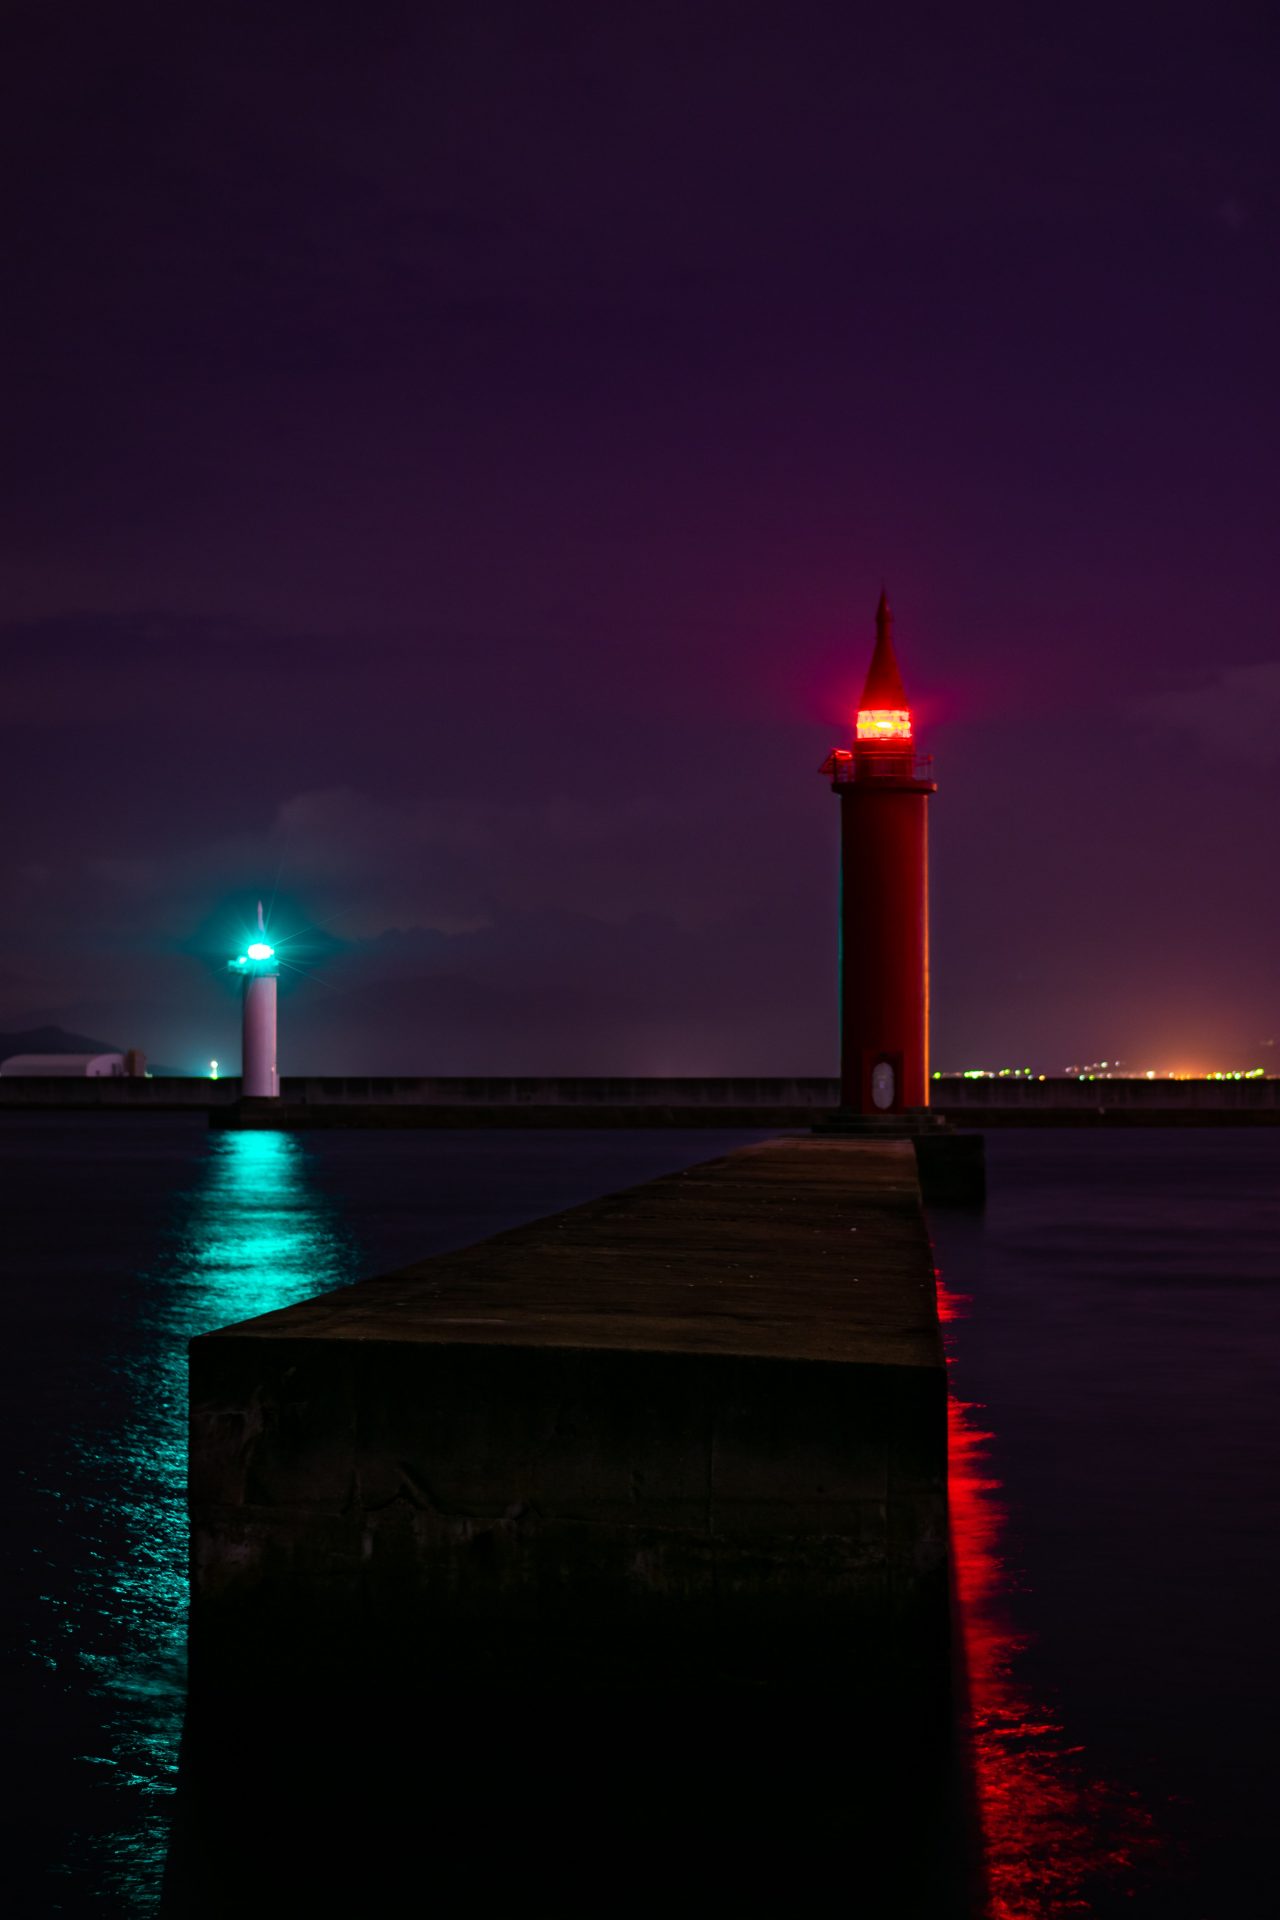 A red and white lighthouse providing the light during the night